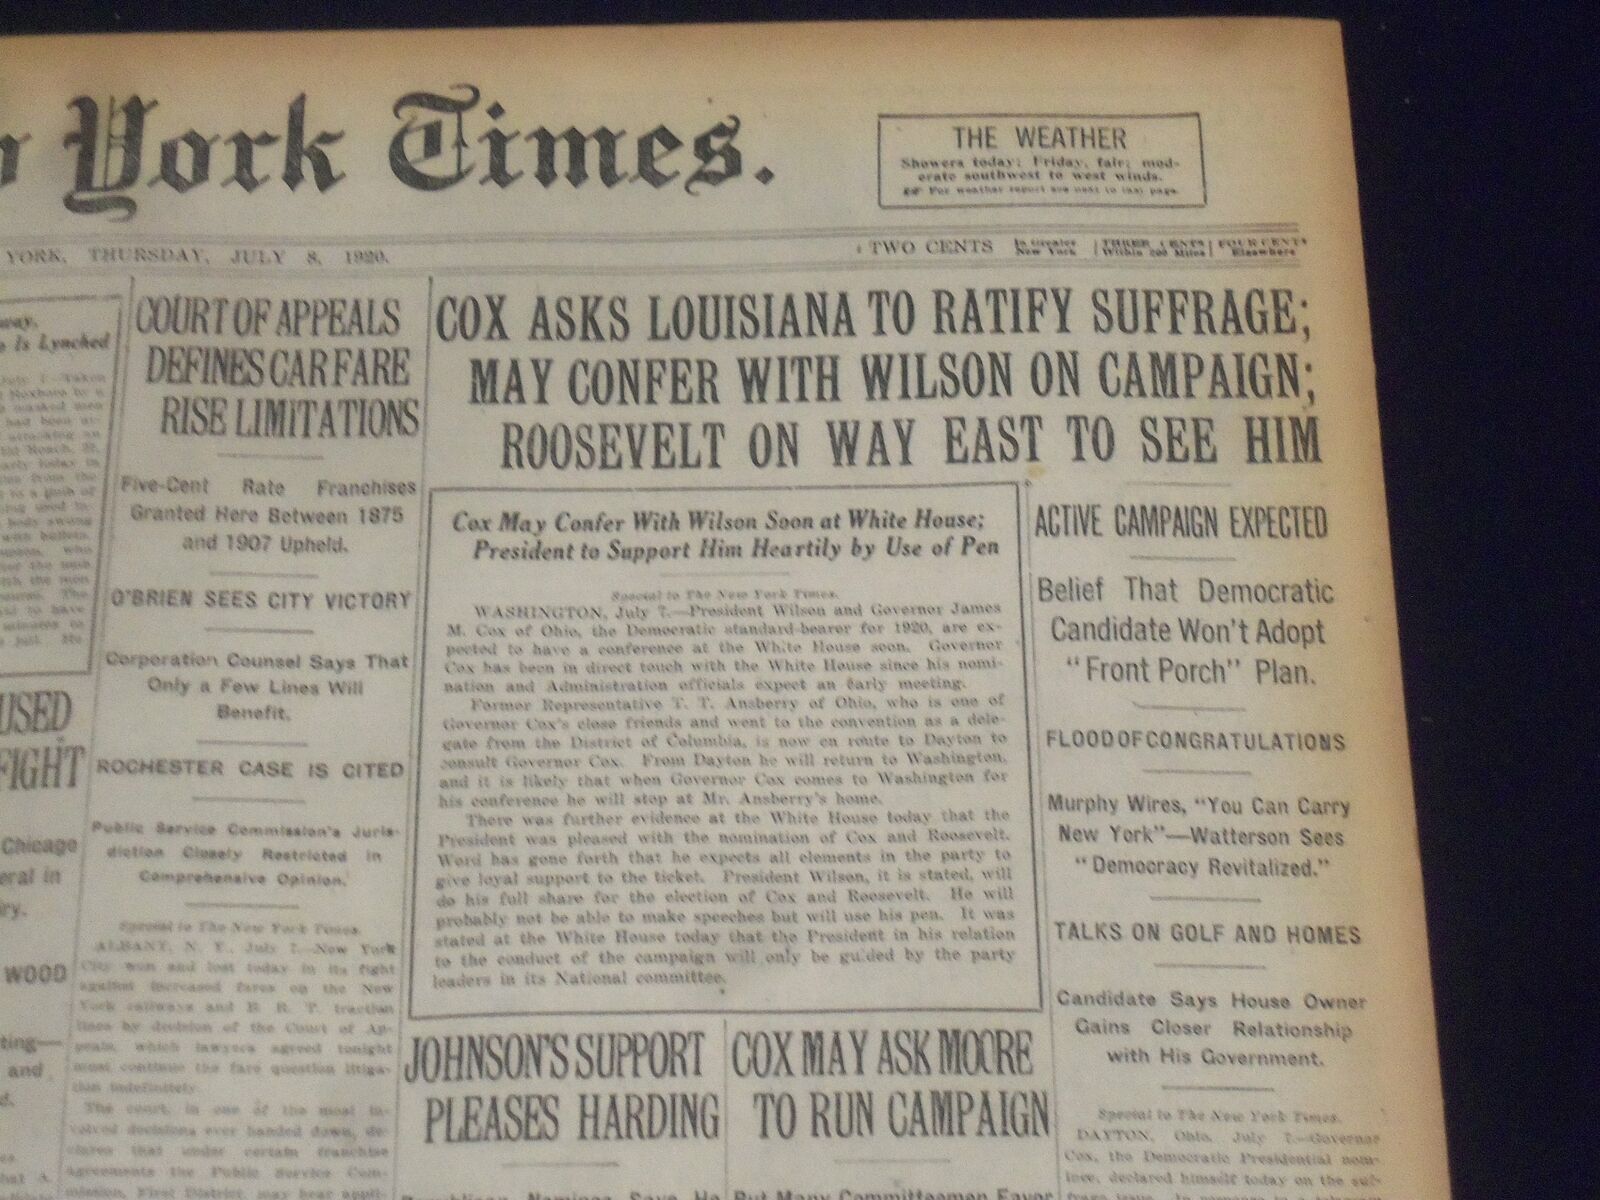 1920 JULY 8 NEW YORK TIMES - COX ASKS LOUISIANA TO RATIFY SUFFRAGE - NT 9324